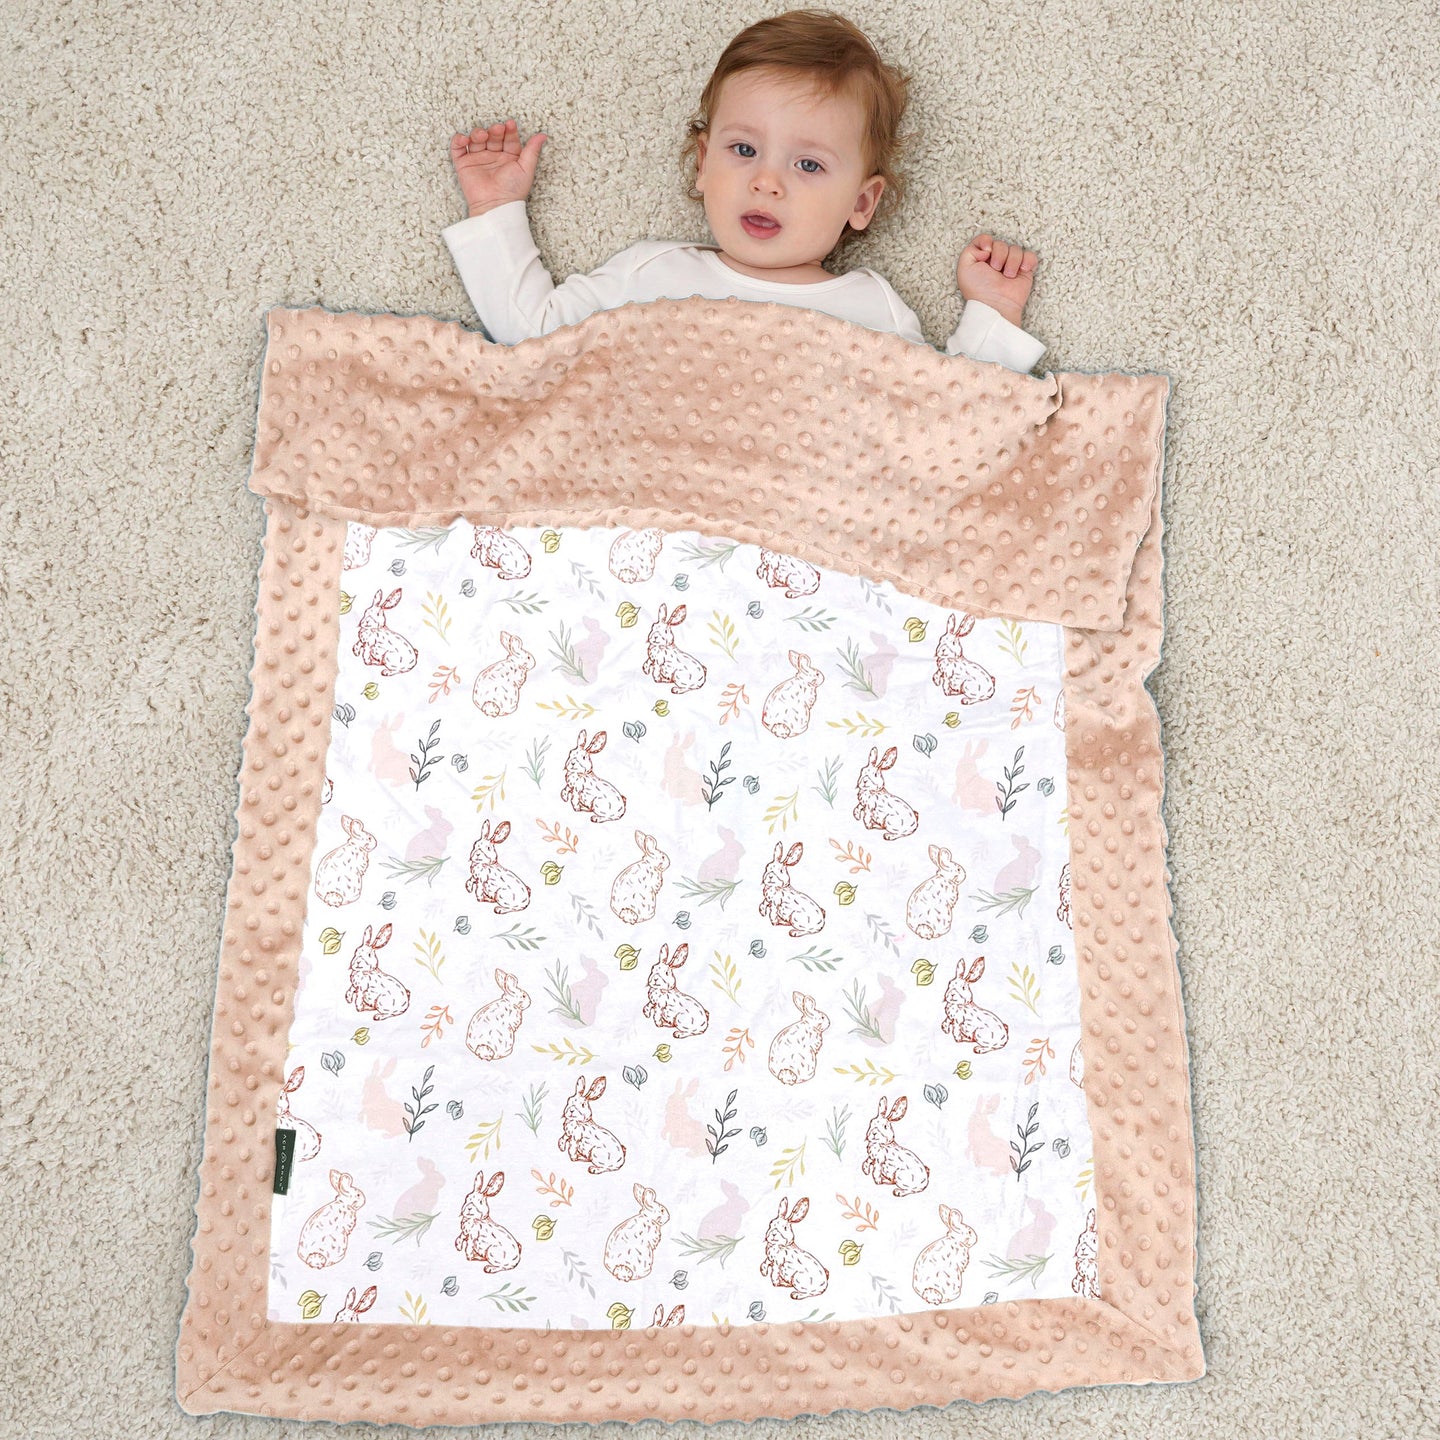 ACRABROS Baby Blankets Double Layer Dotted Backing 30X40 Inches,Linear Rabbits